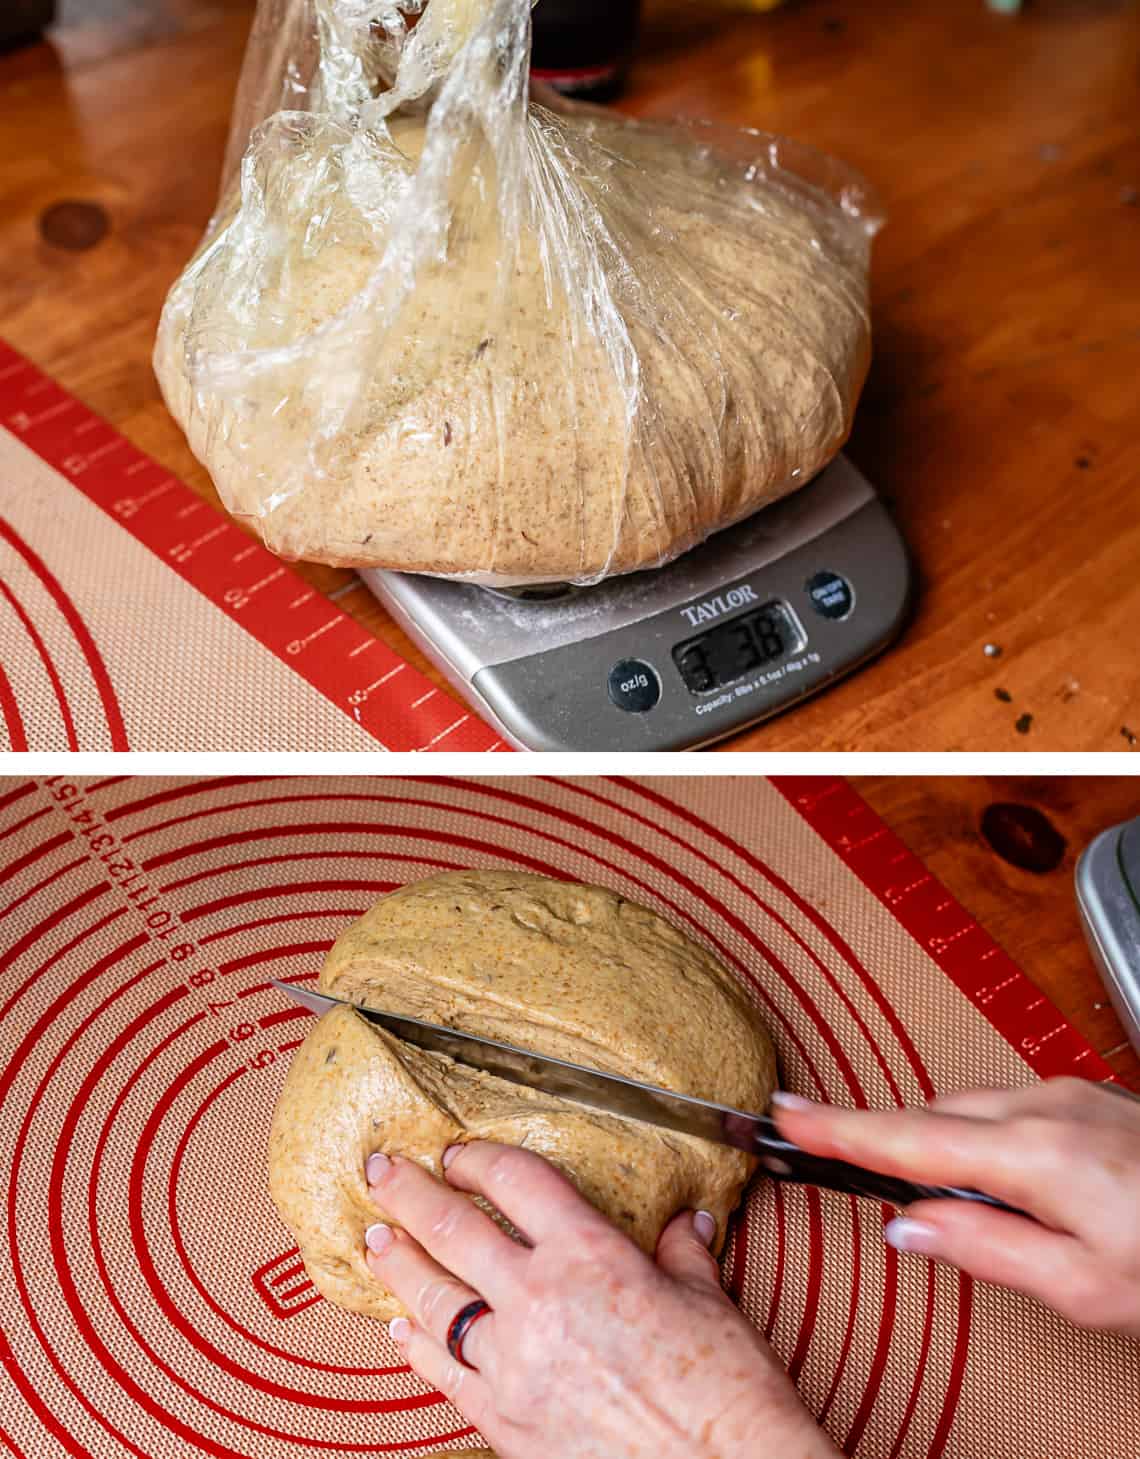 top weighing dough in plastic wrap on scale, bottom cutting dough with knife.